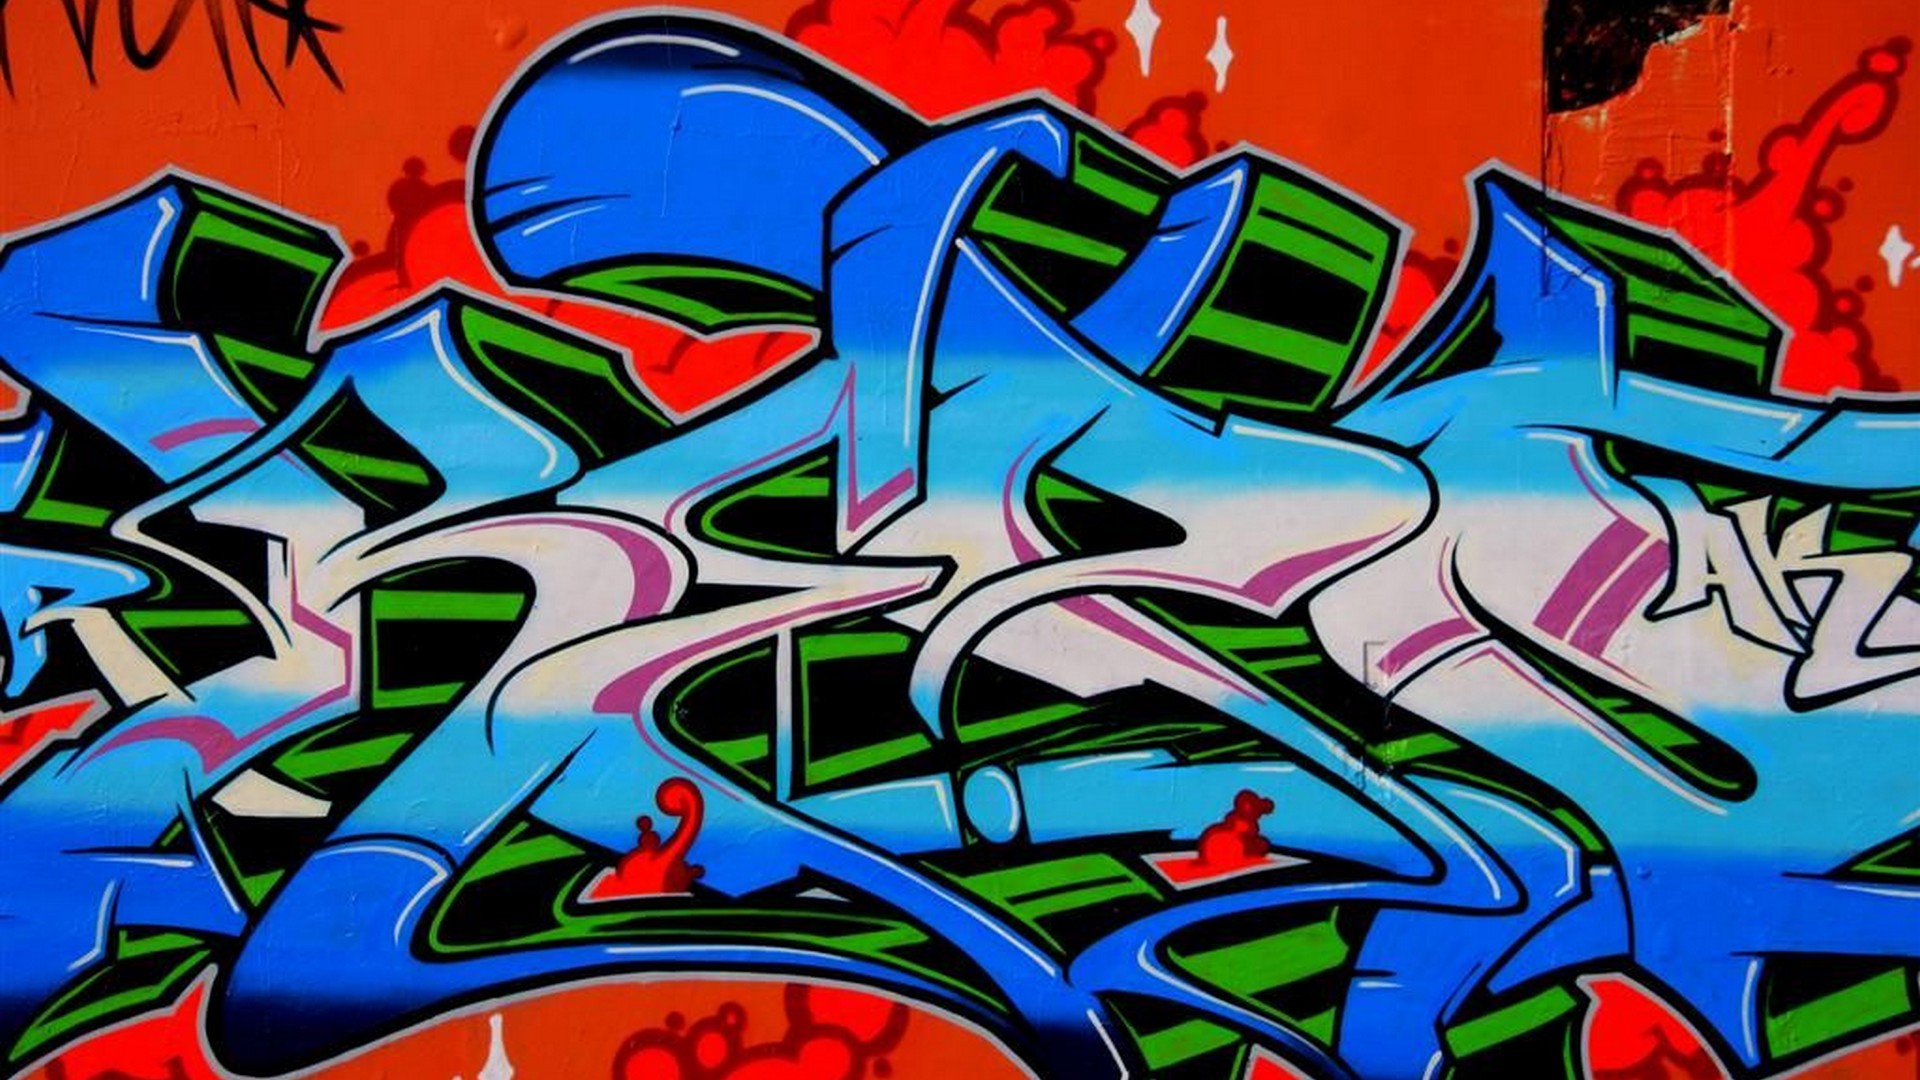 Wallpaper HD Graffiti Letters with image resolution 1920x1080 pixel. You can make this wallpaper for your Desktop Computer Backgrounds, Mac Wallpapers, Android Lock screen or iPhone Screensavers